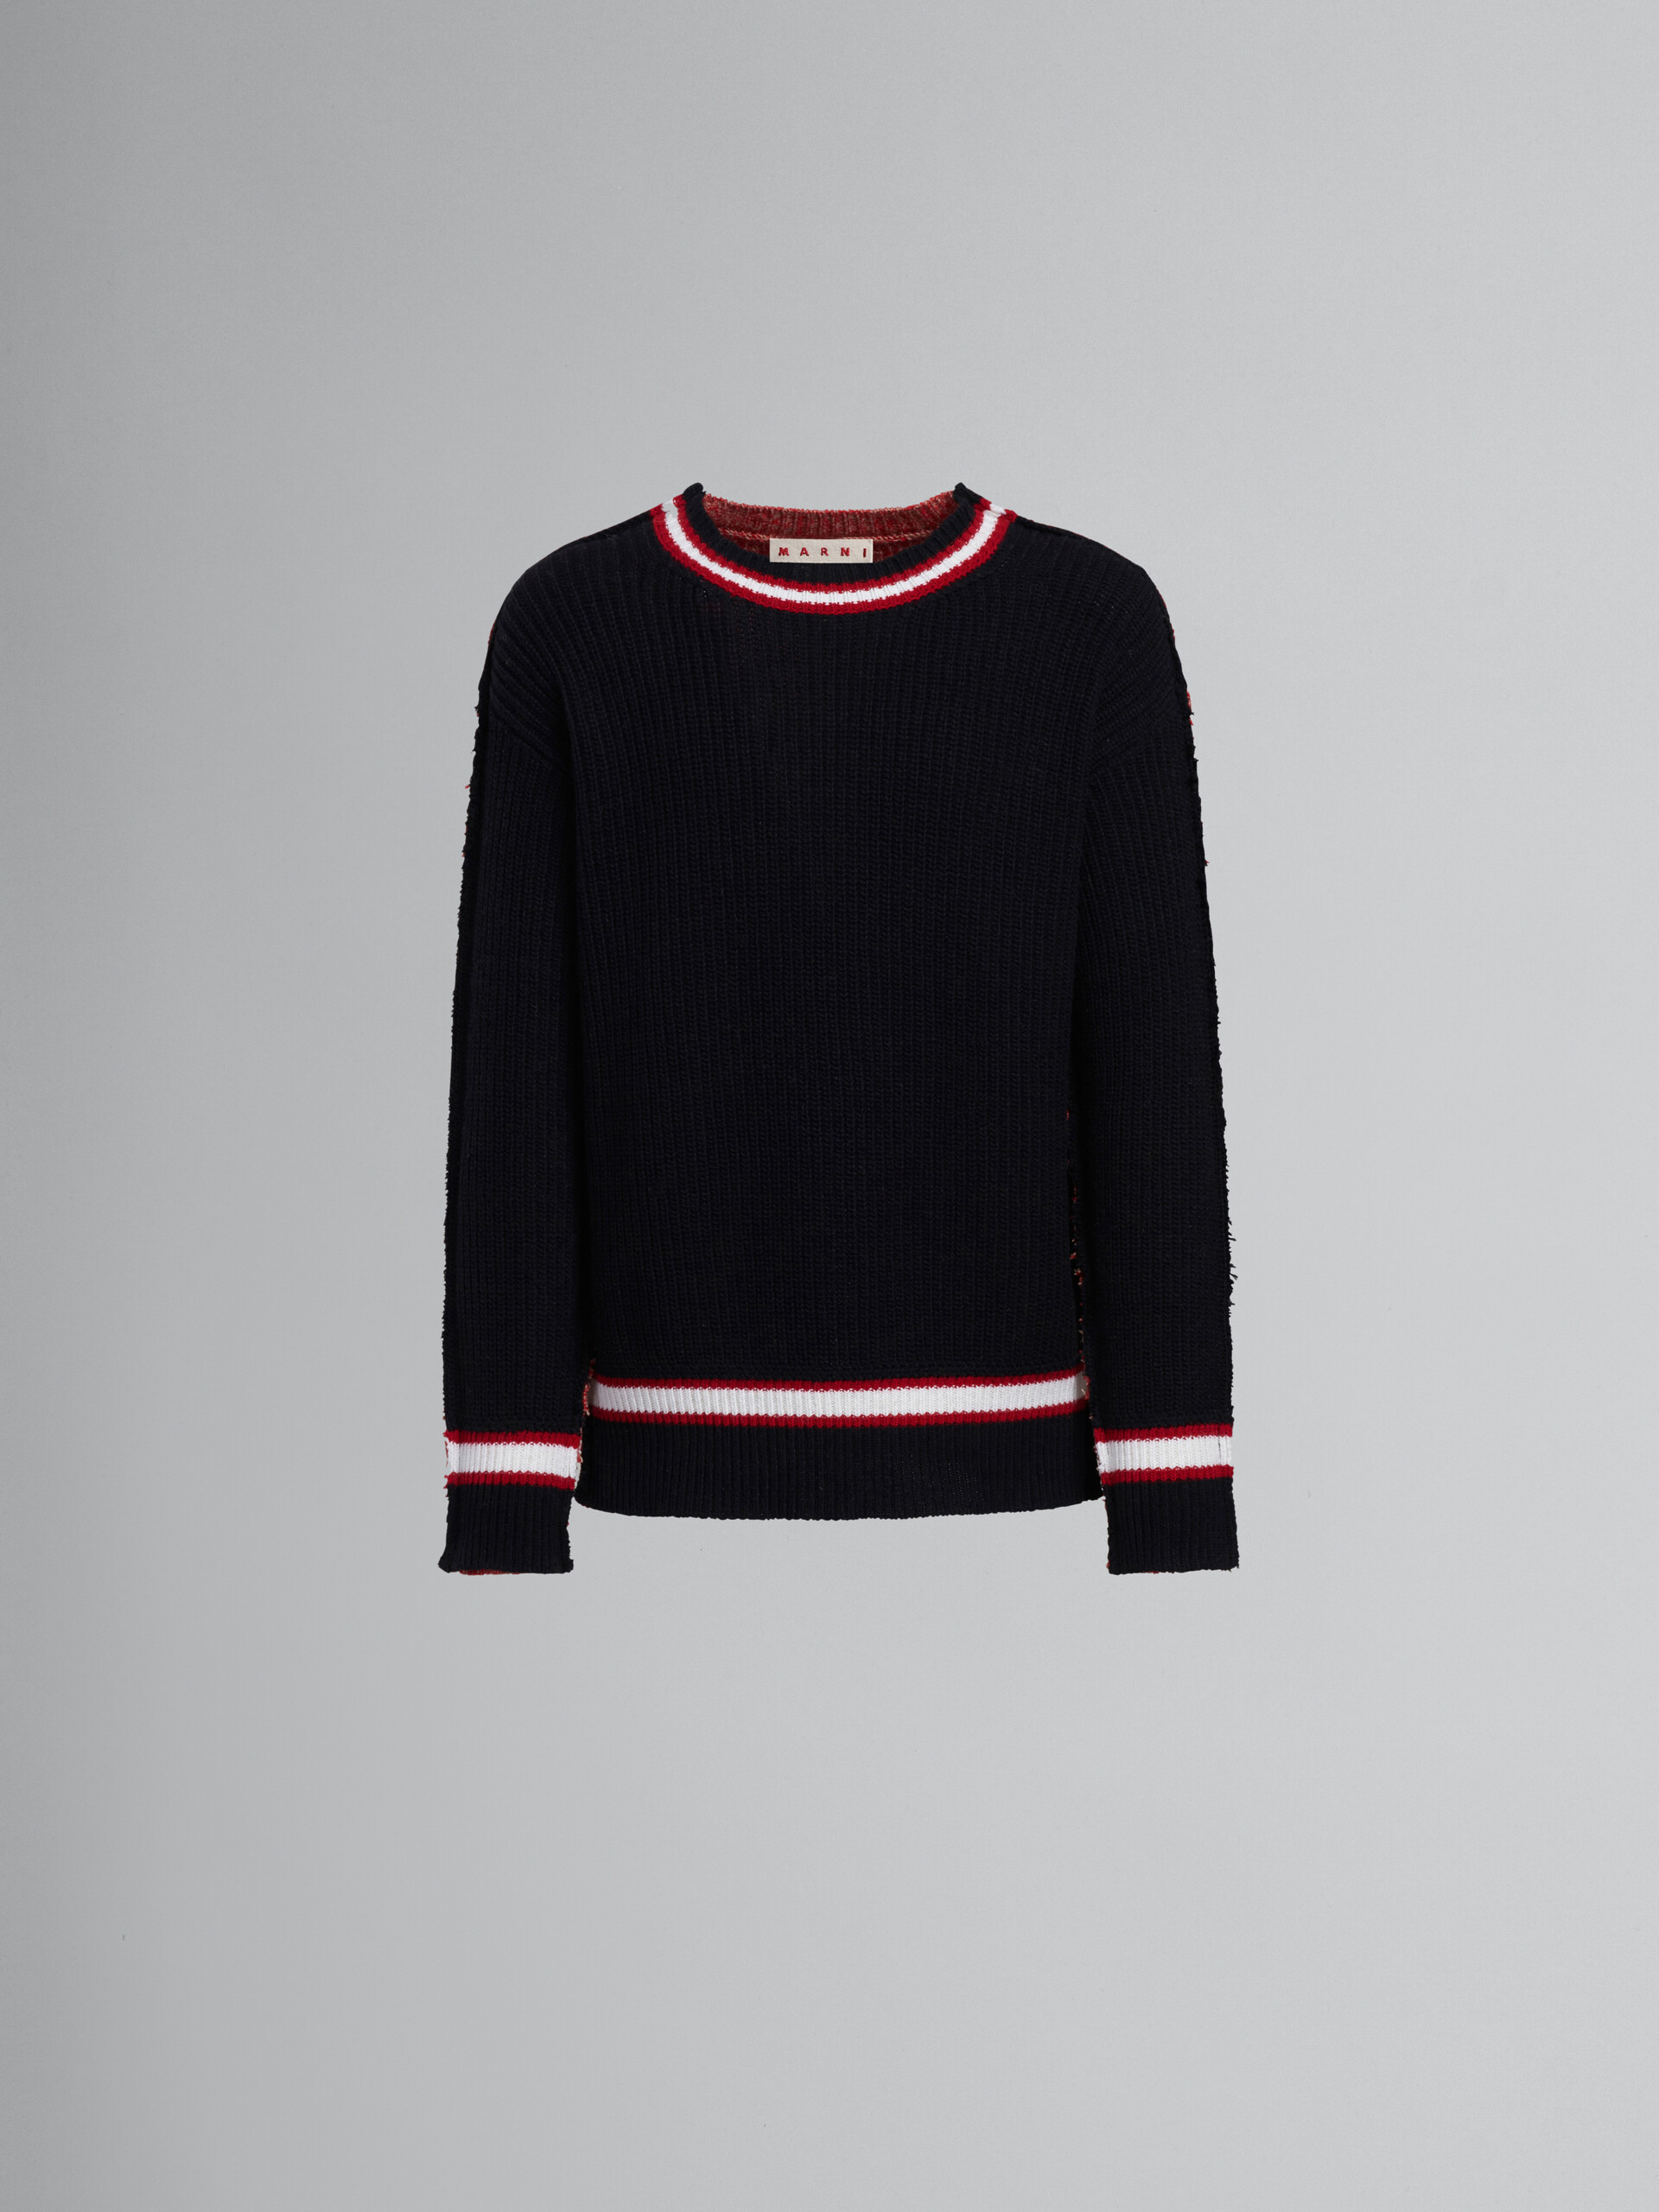 Black knitted crewneck sweater - Pullovers - Image 1